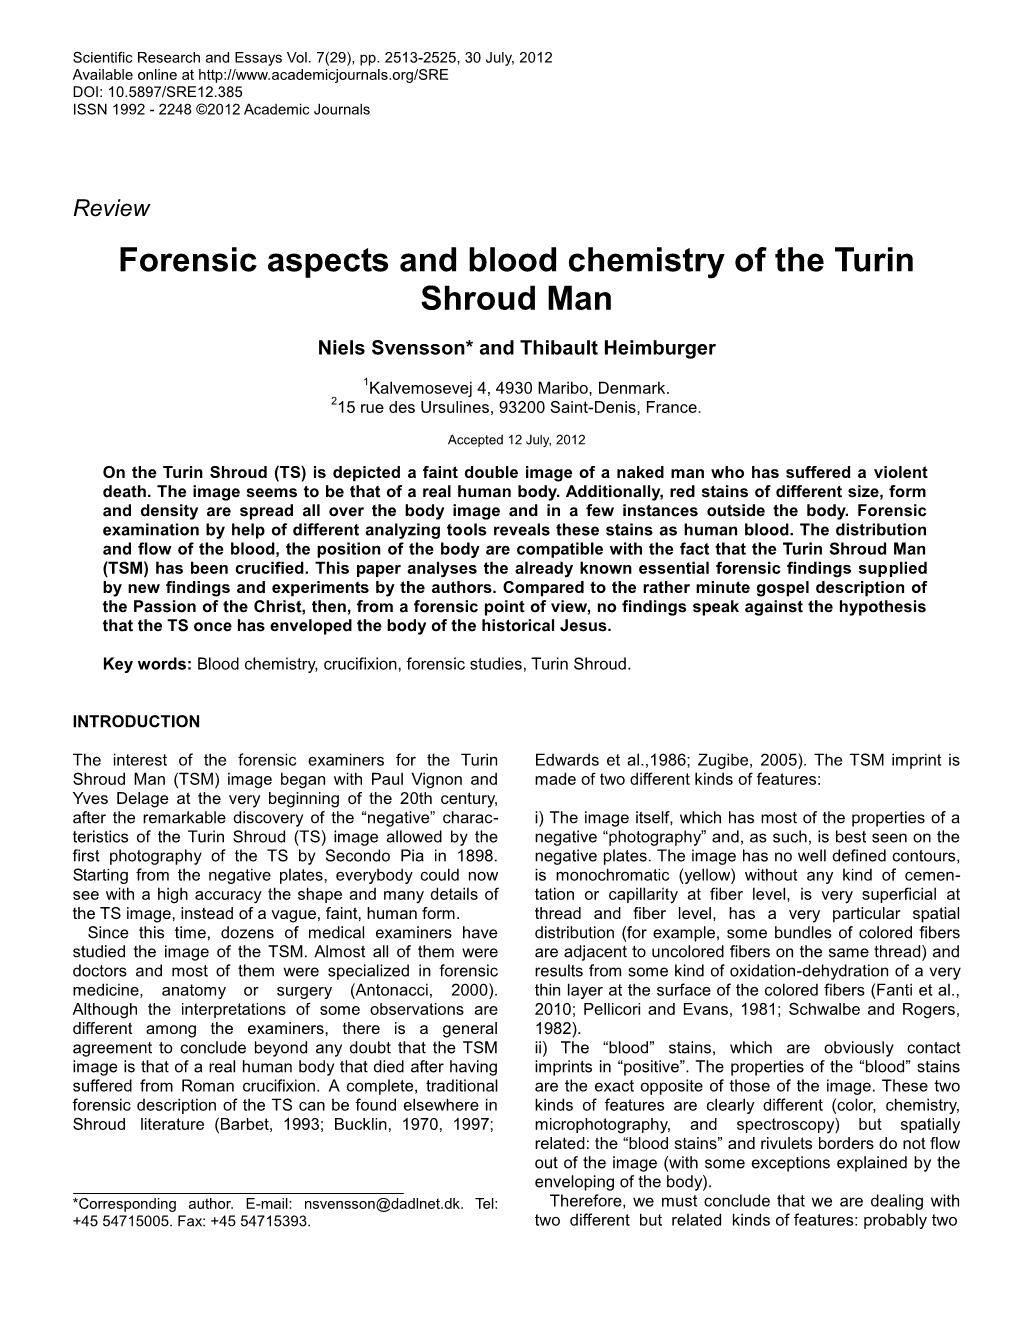 Forensic Aspects and Blood Chemistry of the Turin Shroud Man